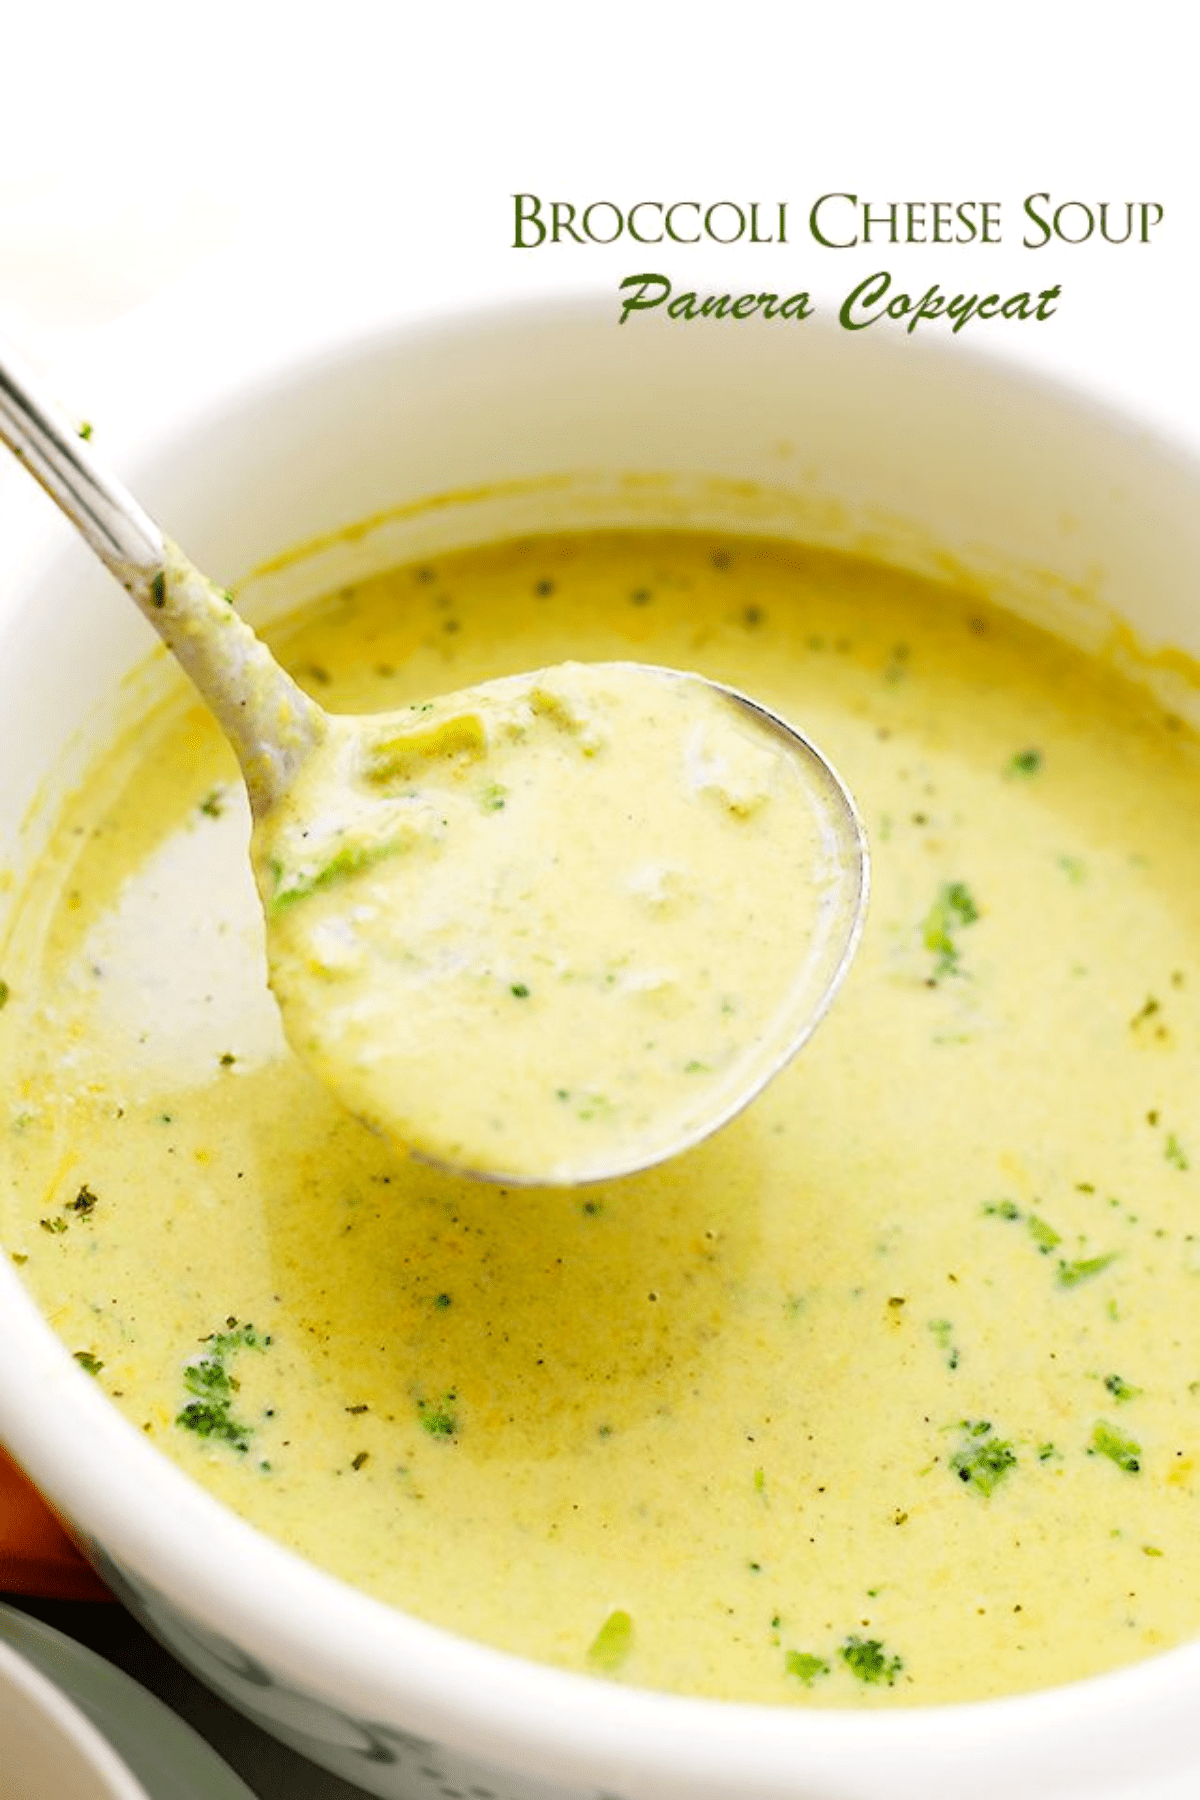 ladle filled with broccoli cheese soup